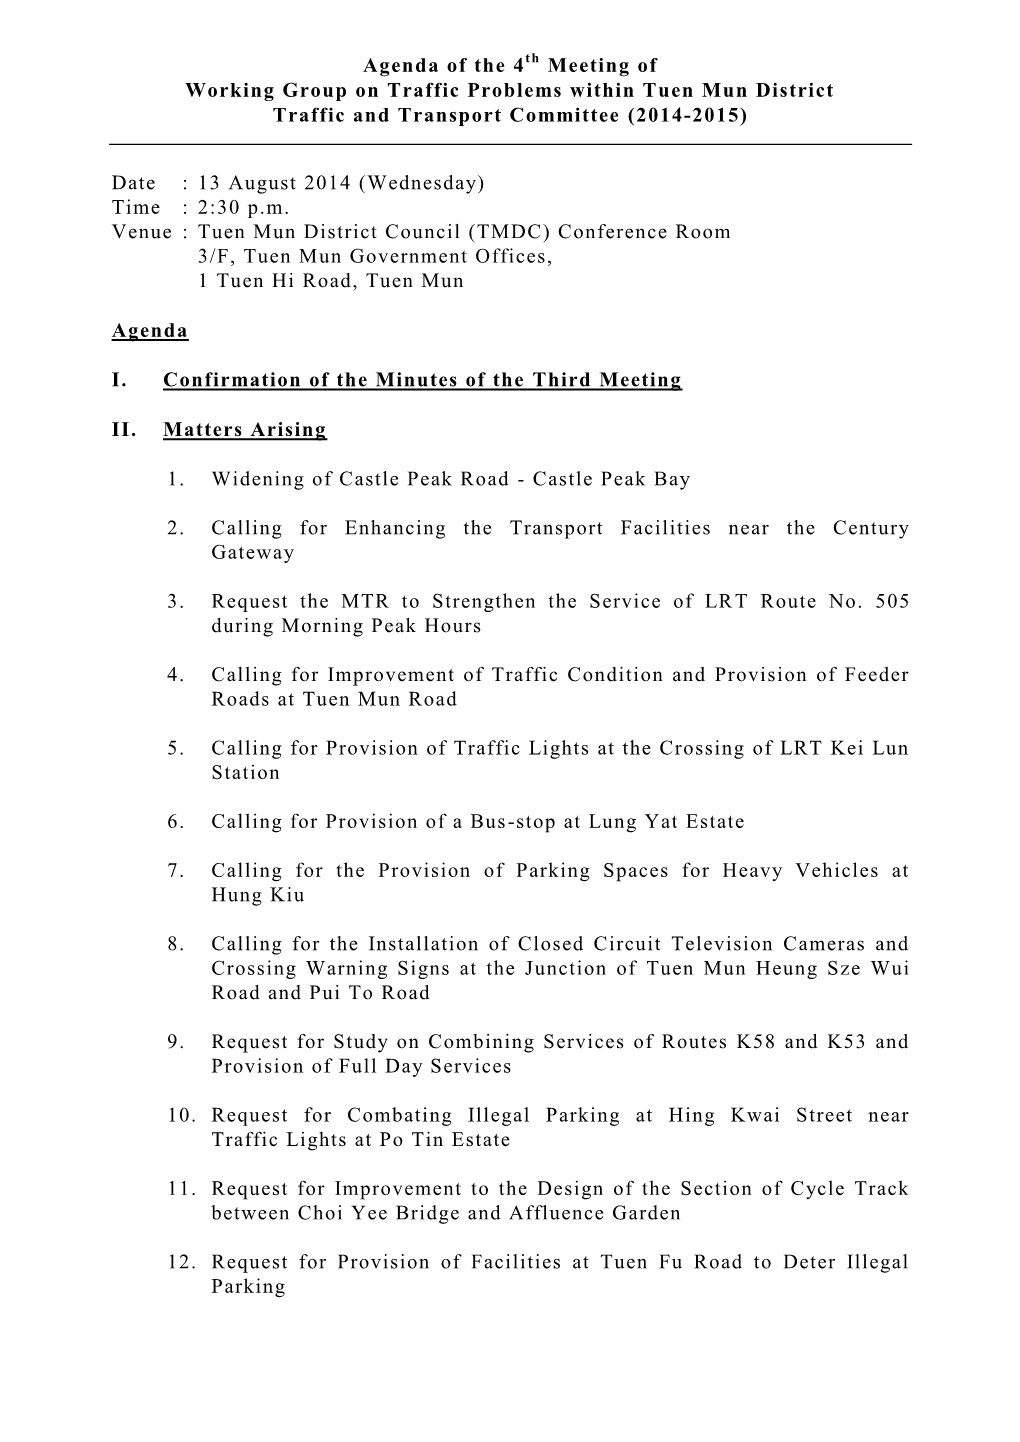 Agenda of the 4Th Meeting of Working Group on Traffic Problems Within Tuen Mun District Traffic and Transport Committee (2014-2015)